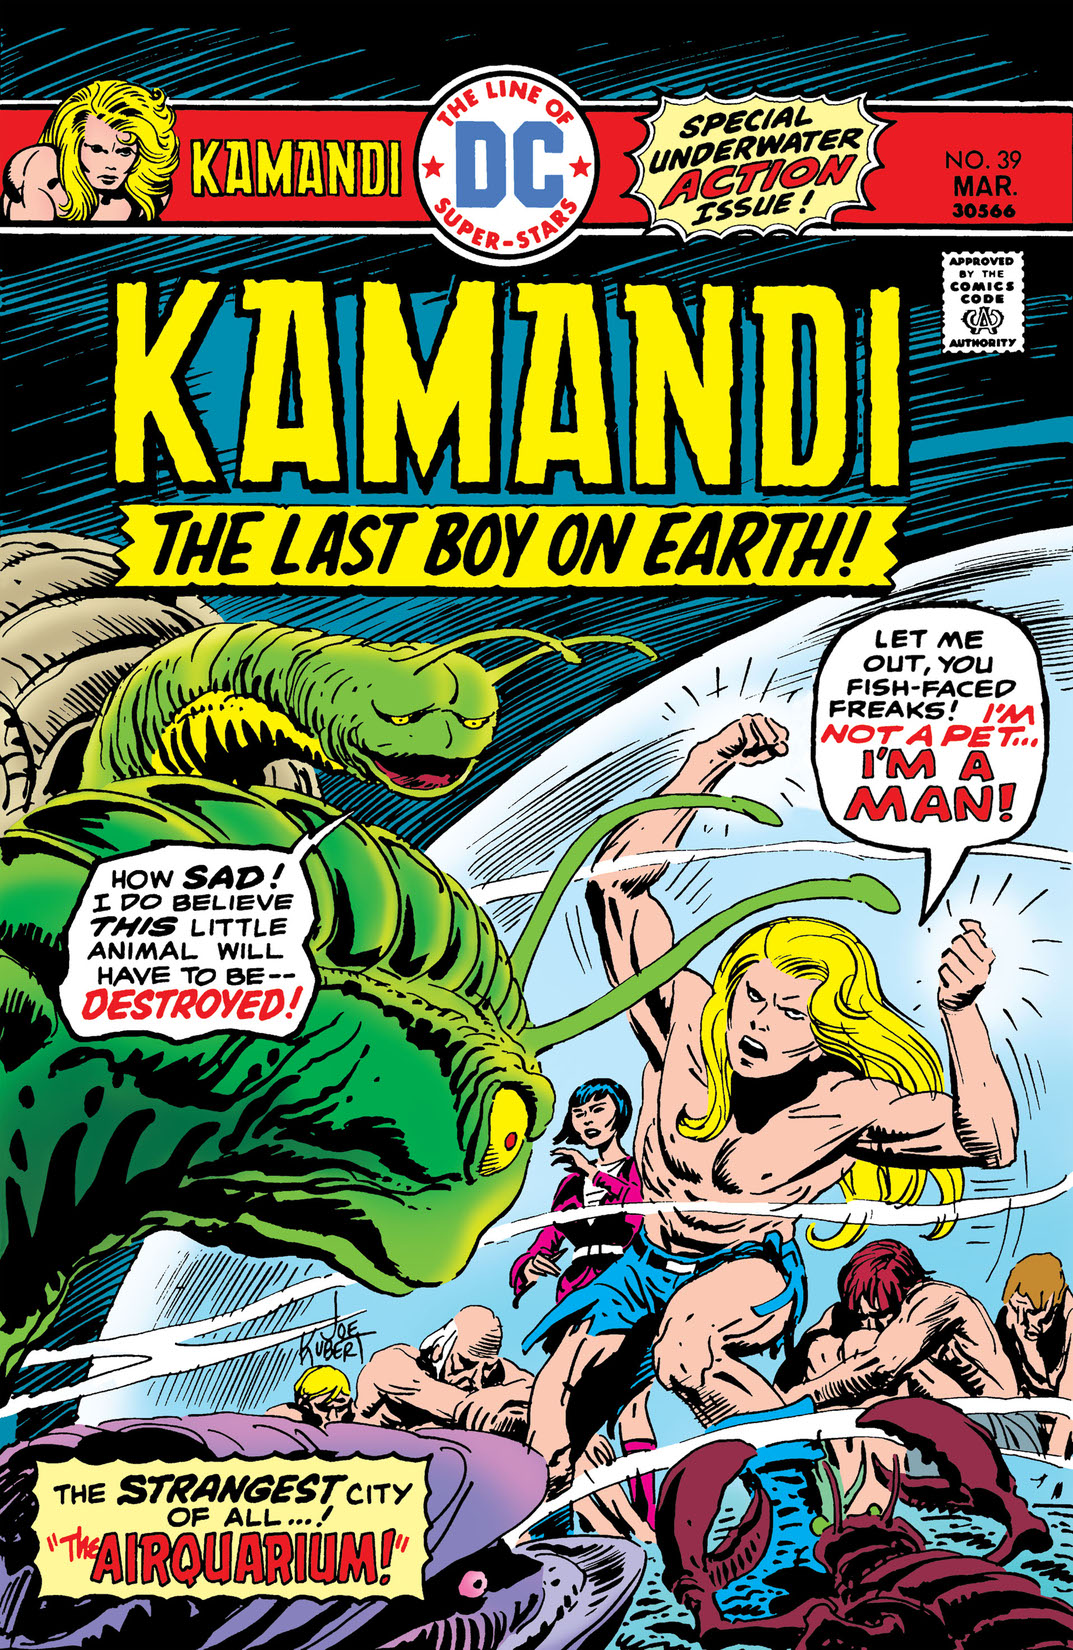 Kamandi: The Last Boy on Earth #39 preview images